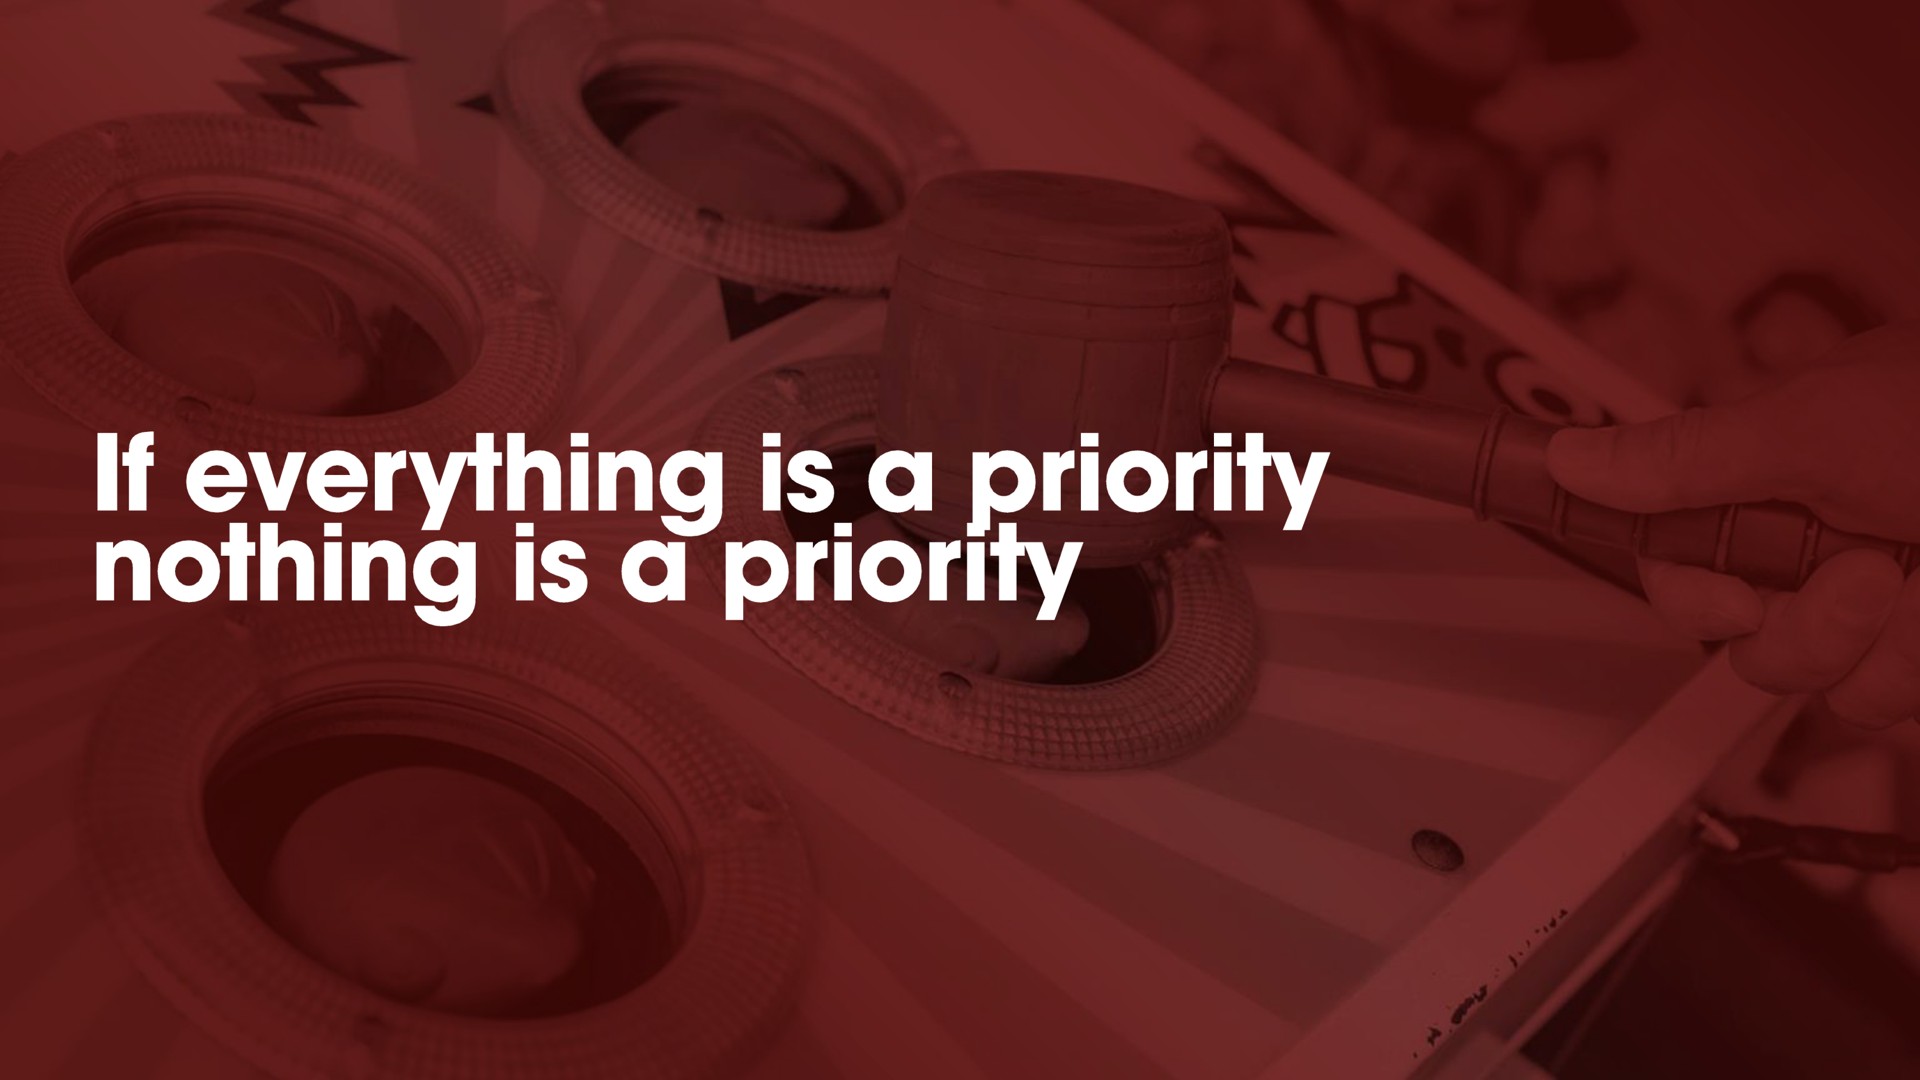 if everything is a priority | Crowdstrike